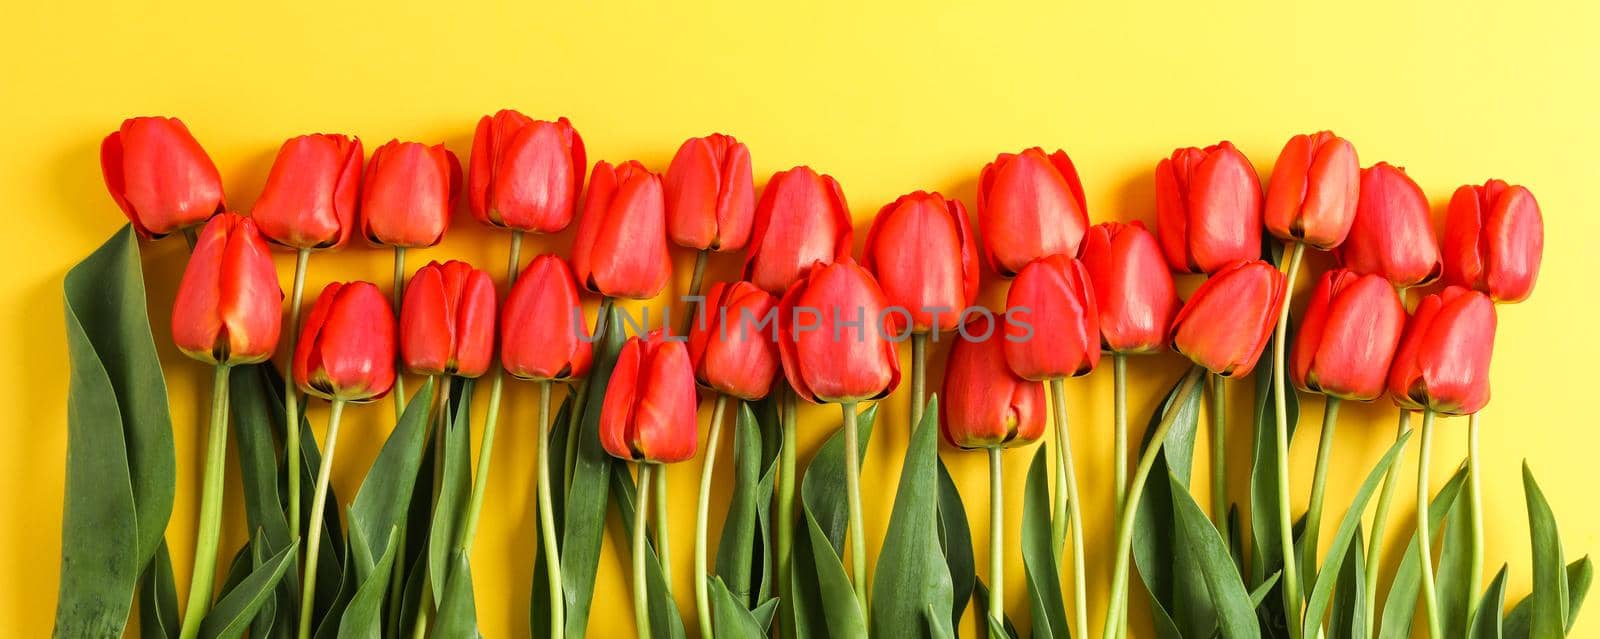 Composition with beautiful red tulips on yellow background. Spring flowers by AtlasCompany